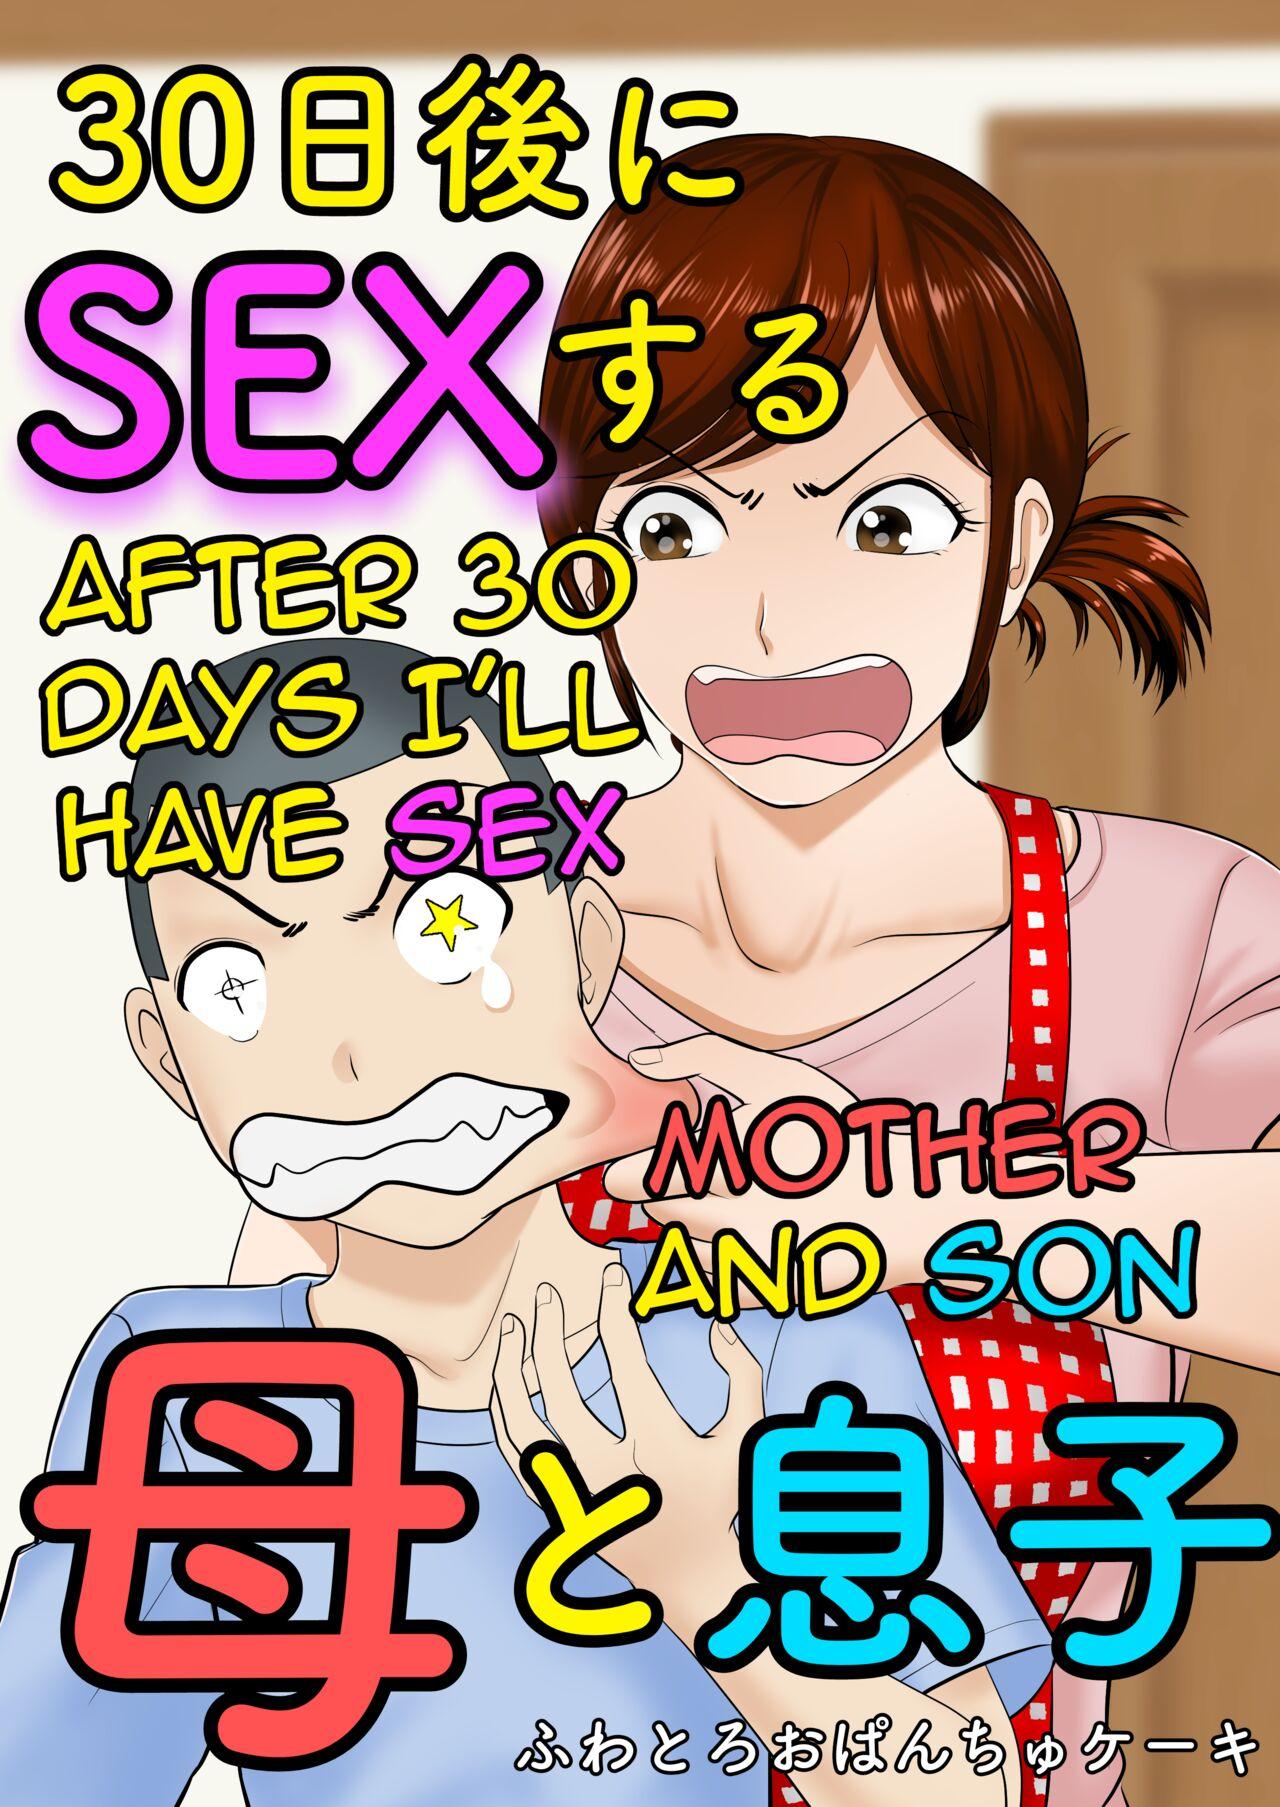 Anal Gape [Fuwatoro Opanchu Cake] 30-nichi go ni SEX suru ~Haha to Musuko~|After 30 Days I'll Have Sex ~Mother and Son~[English][Amoskandy] - Original Brother Sister - Picture 1